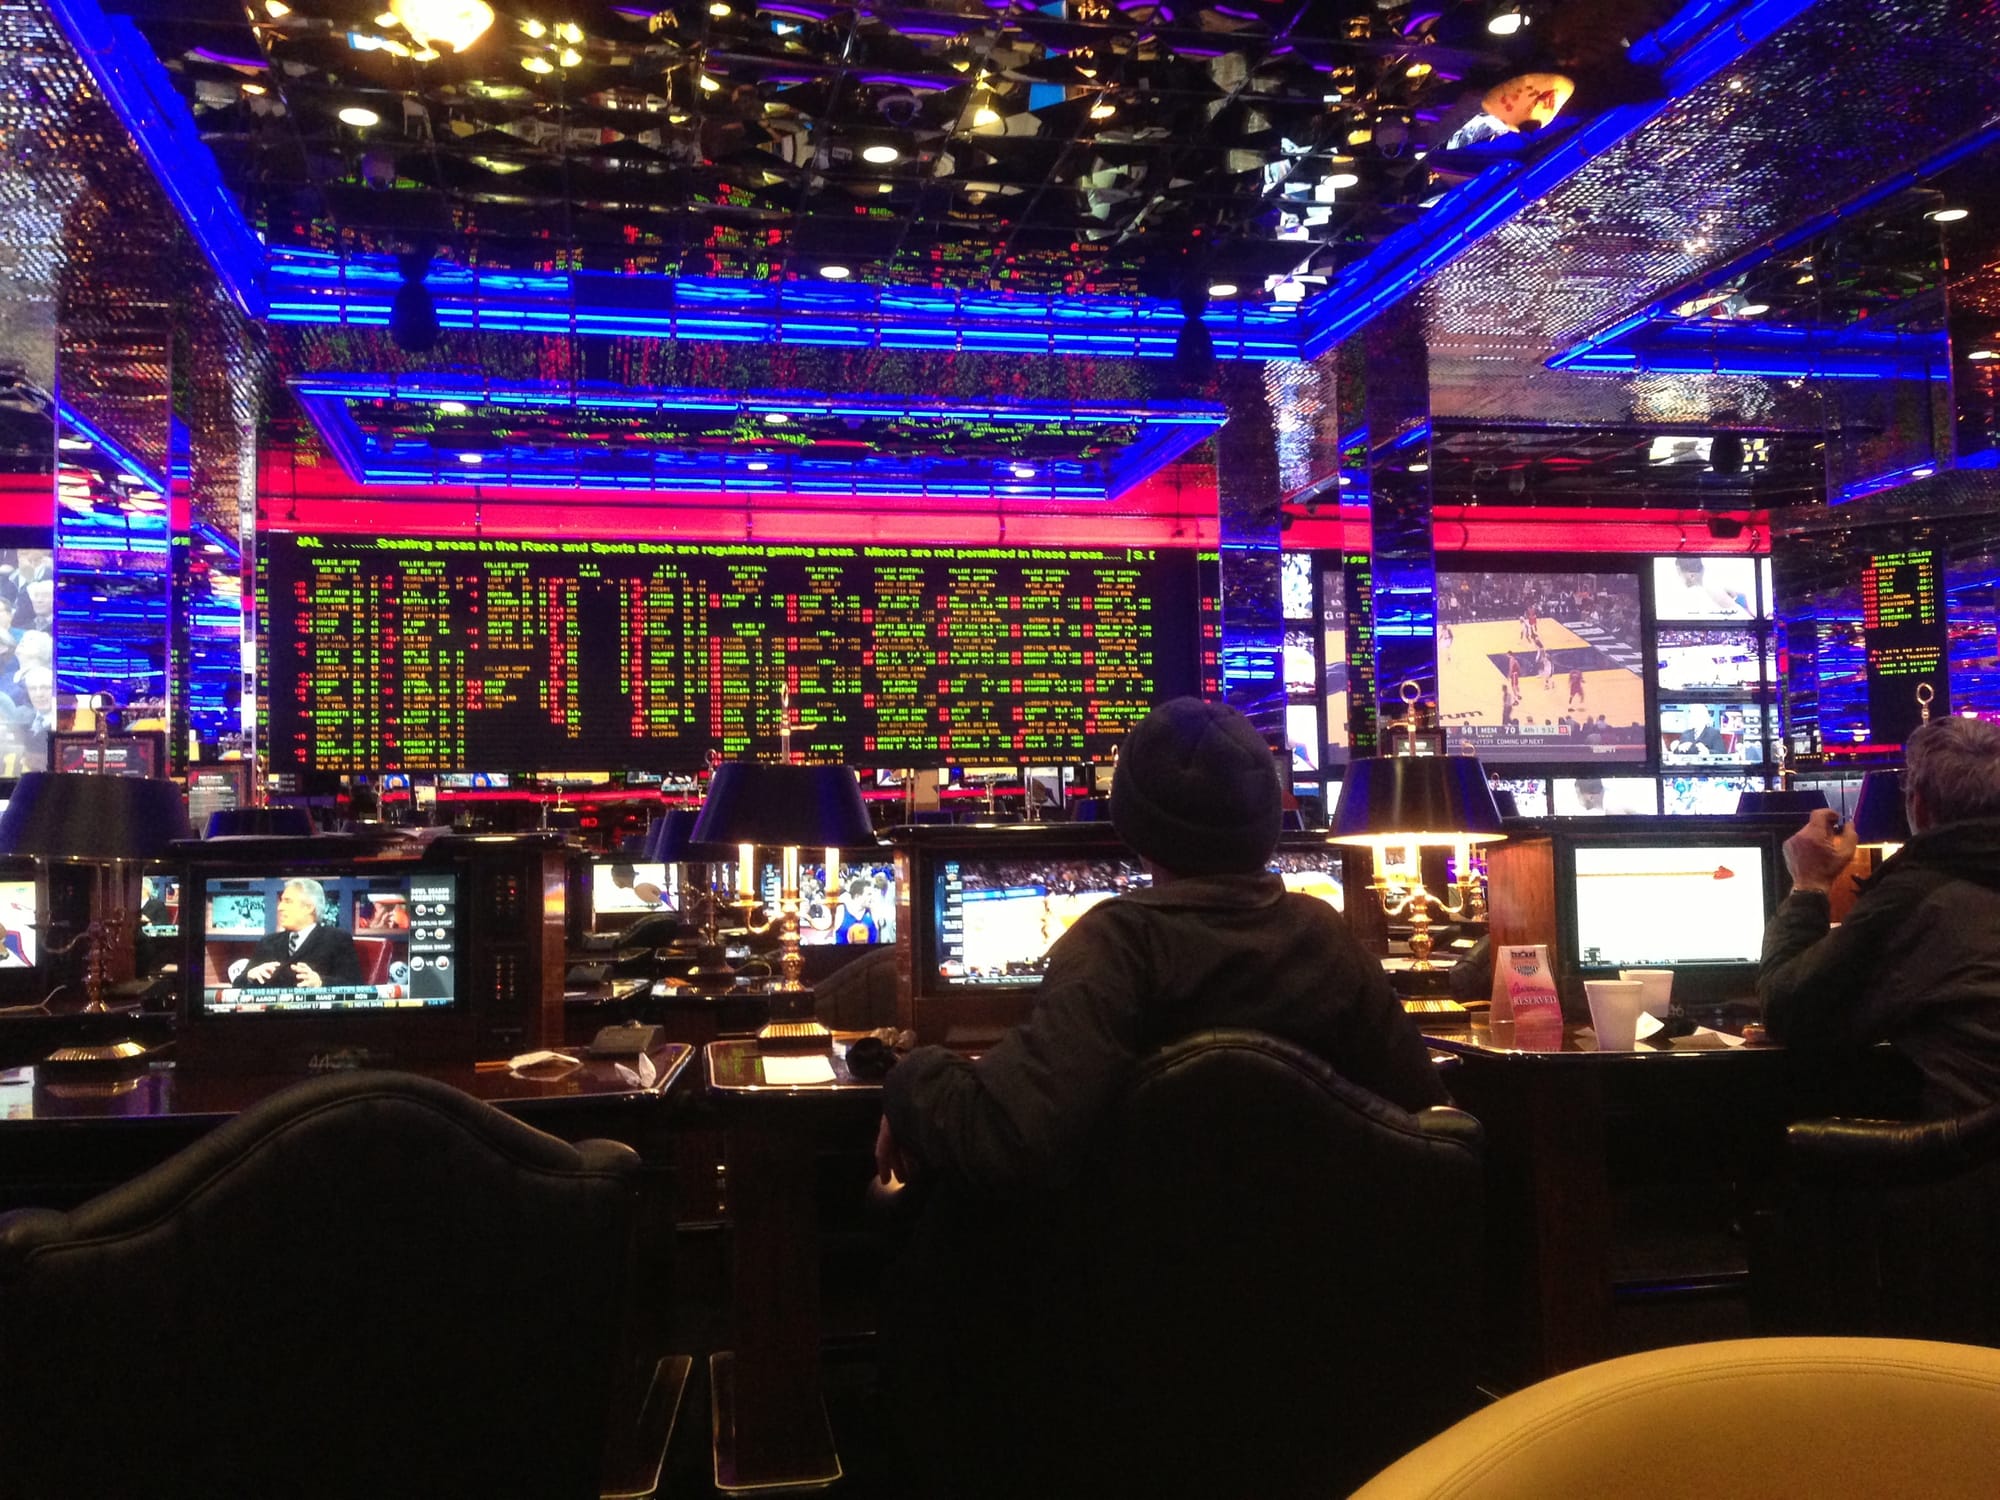 In a darkened casino in Reno, the sports book appears on a huge screen full of complicated text; there's a basketball game in progress on a very small screen off to one side